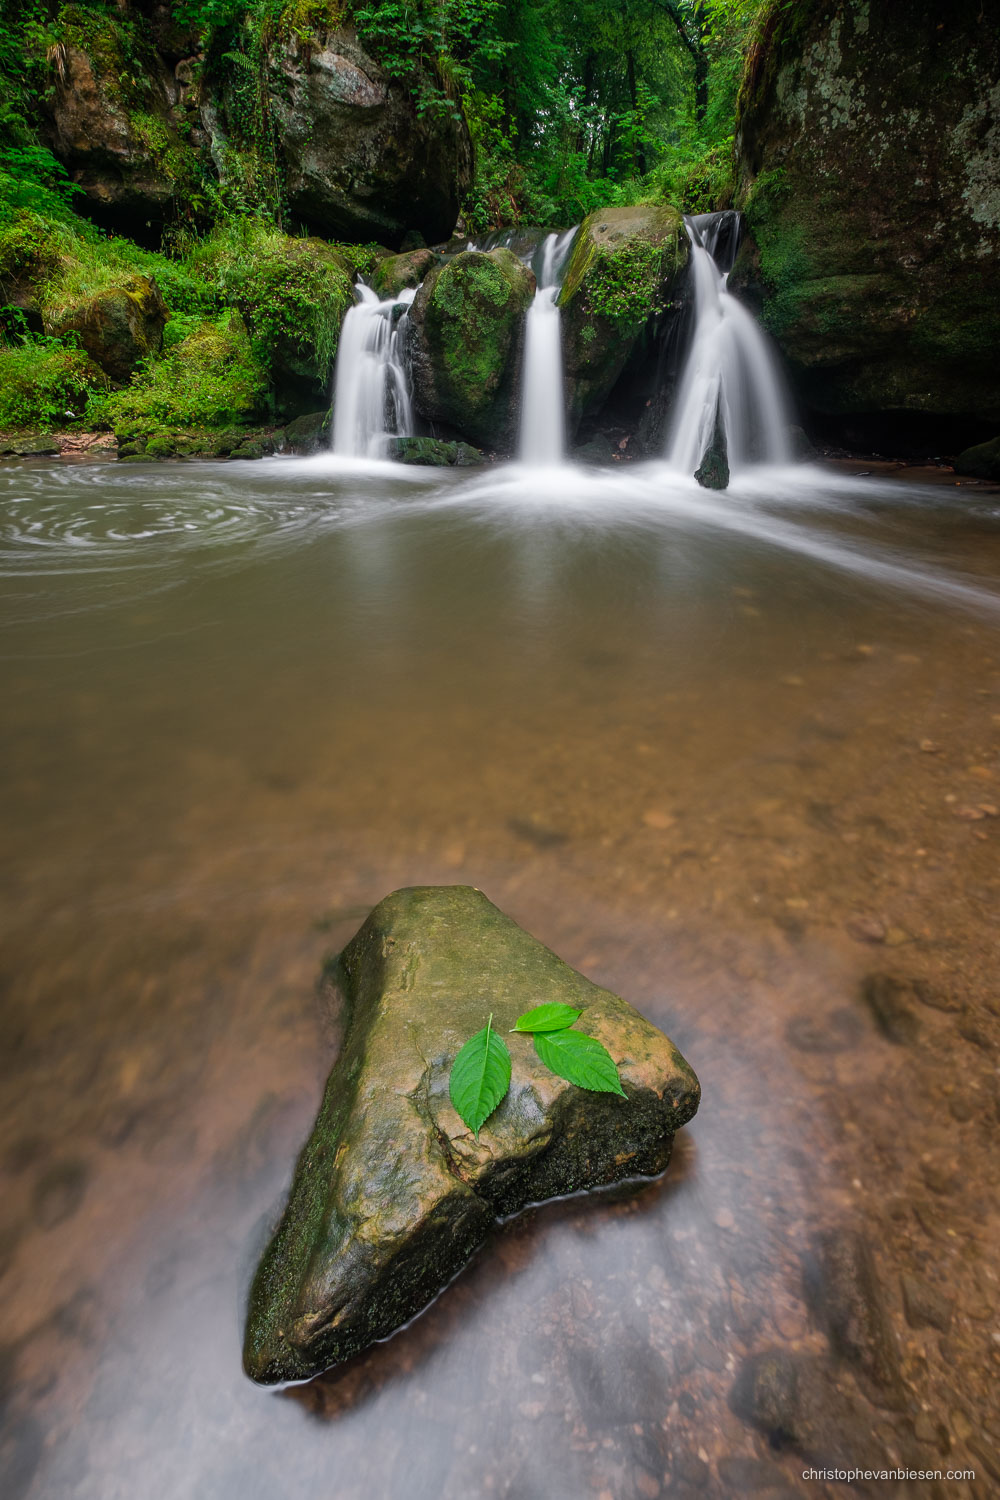 Visit the Mullerthal - Luxembourg - Luxembourg's Schiessentumpel waterfall in the Mullerthal region on a rainy summer day - The Lonely Rock